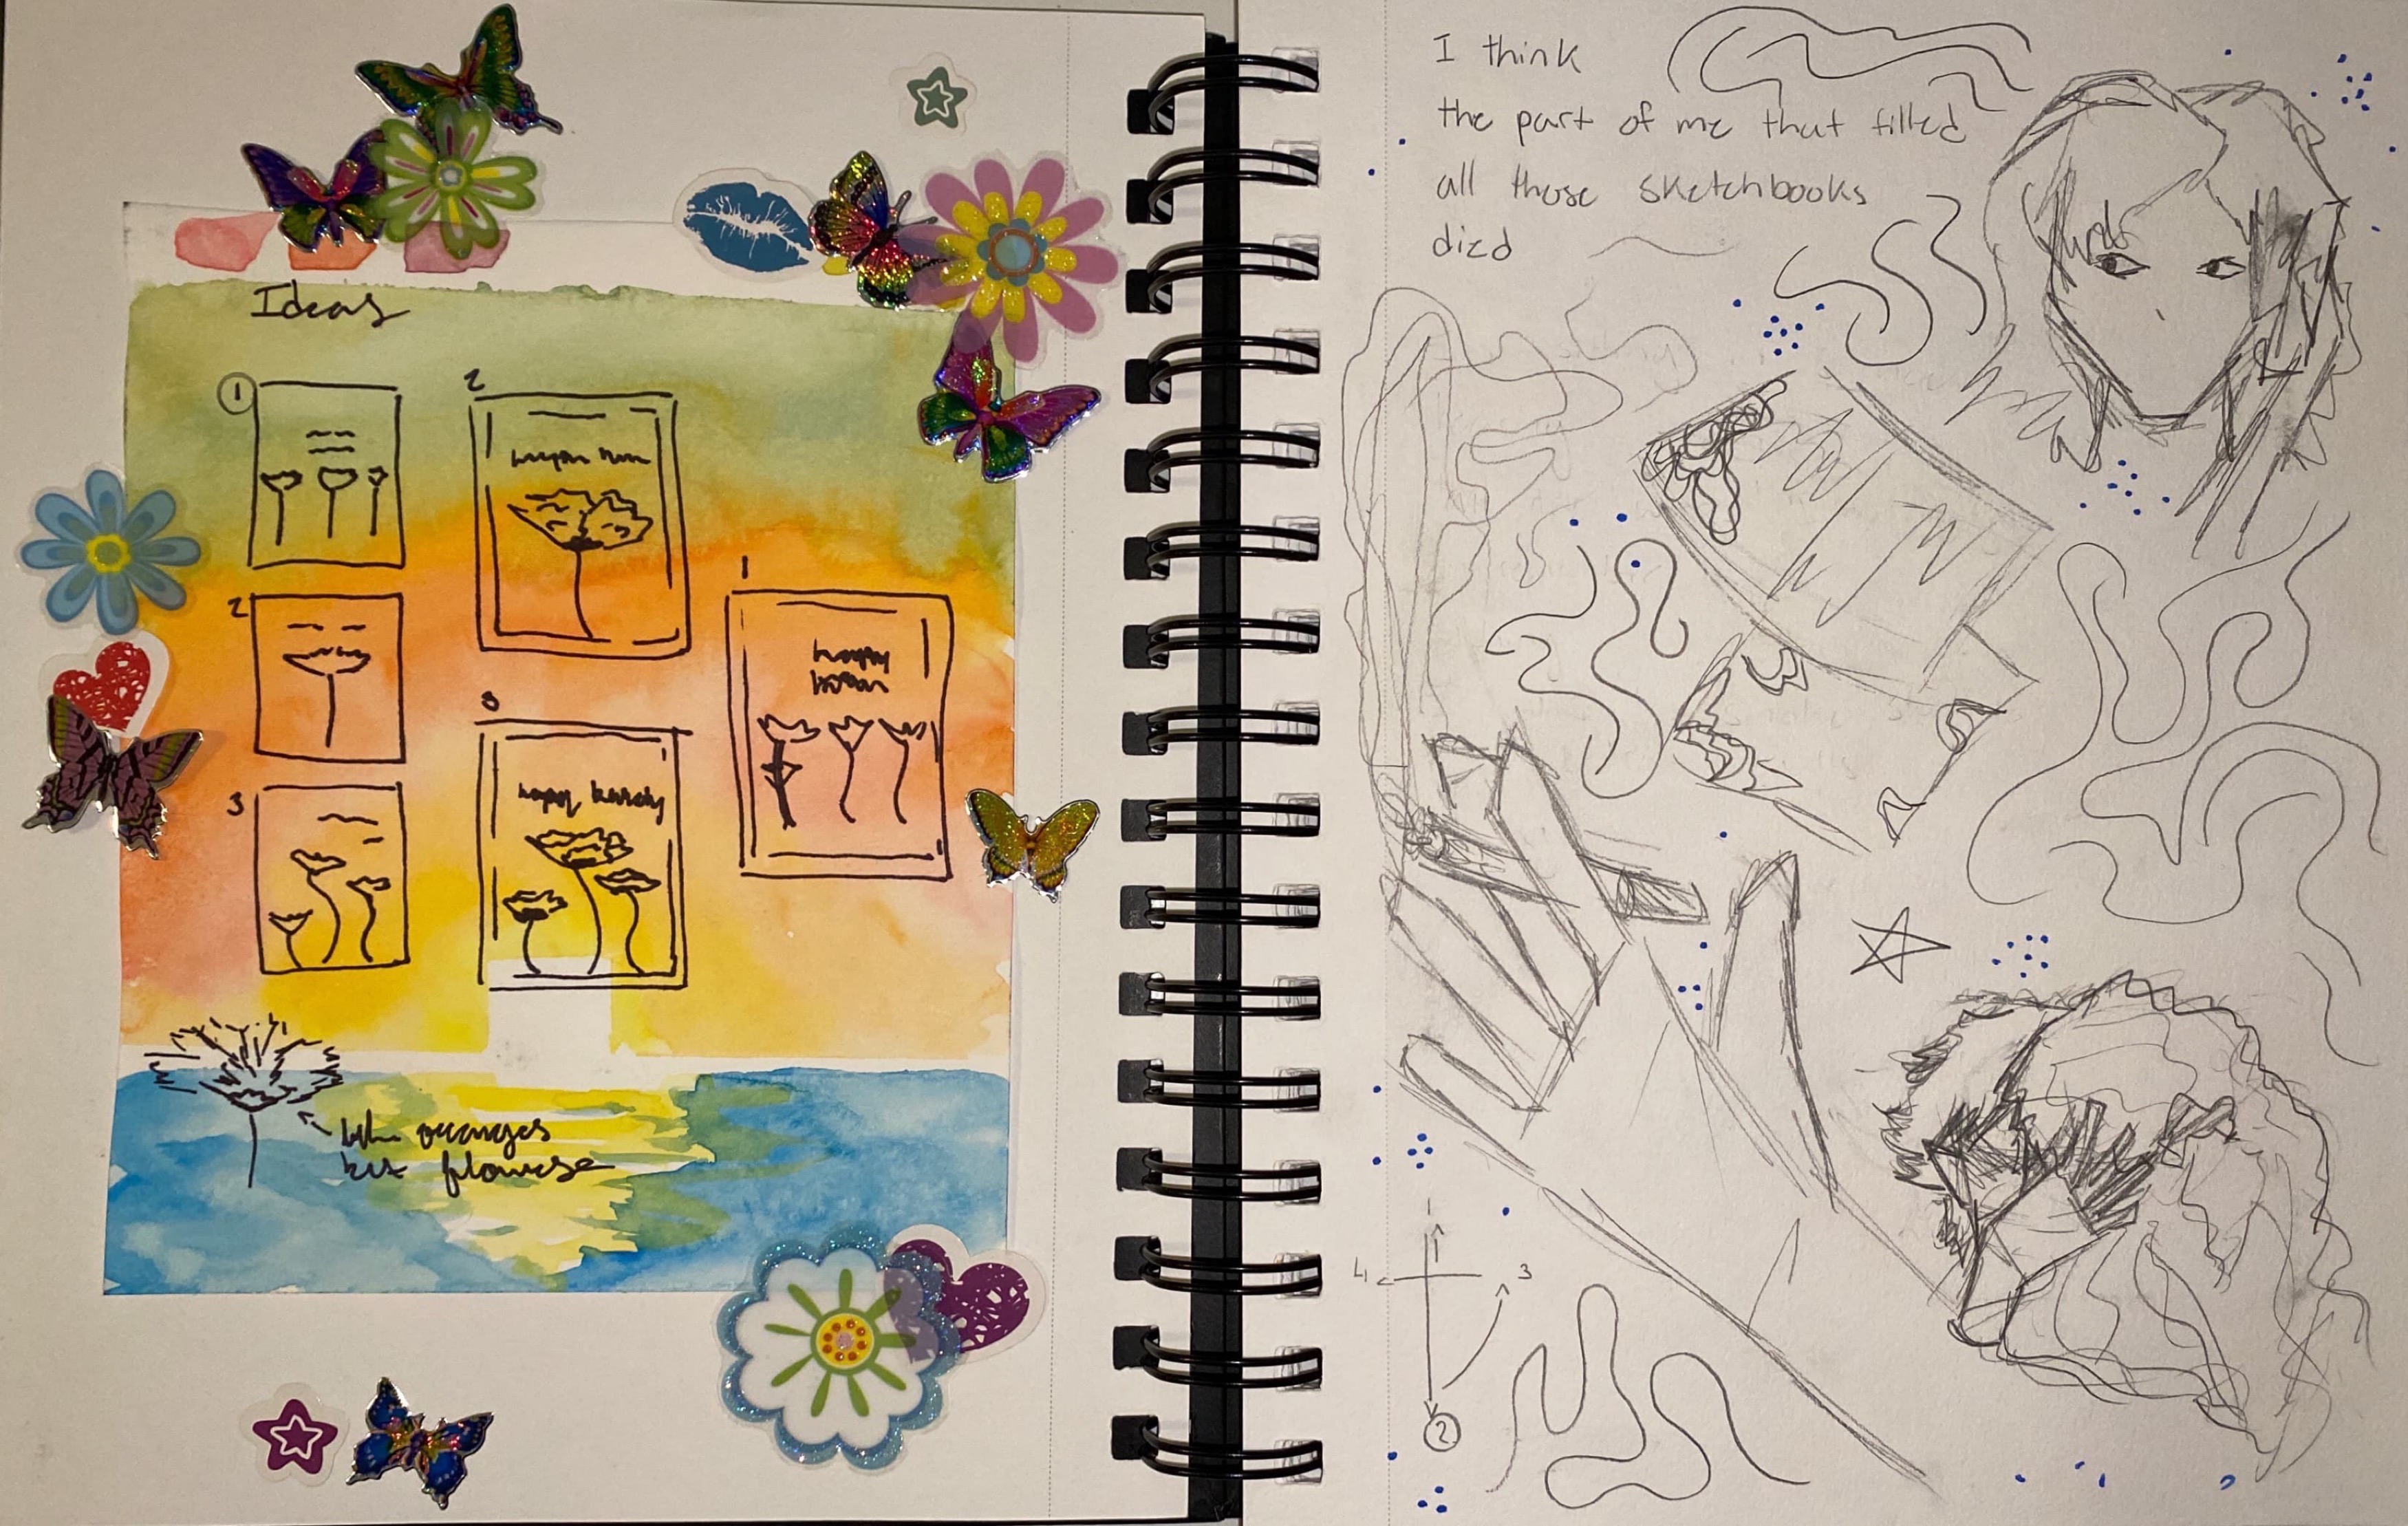 2 pages: a watercolour thumbnail and a bunch of disorganized sketches with the text 'i think the part of me that filled all those sketchbooks died' 